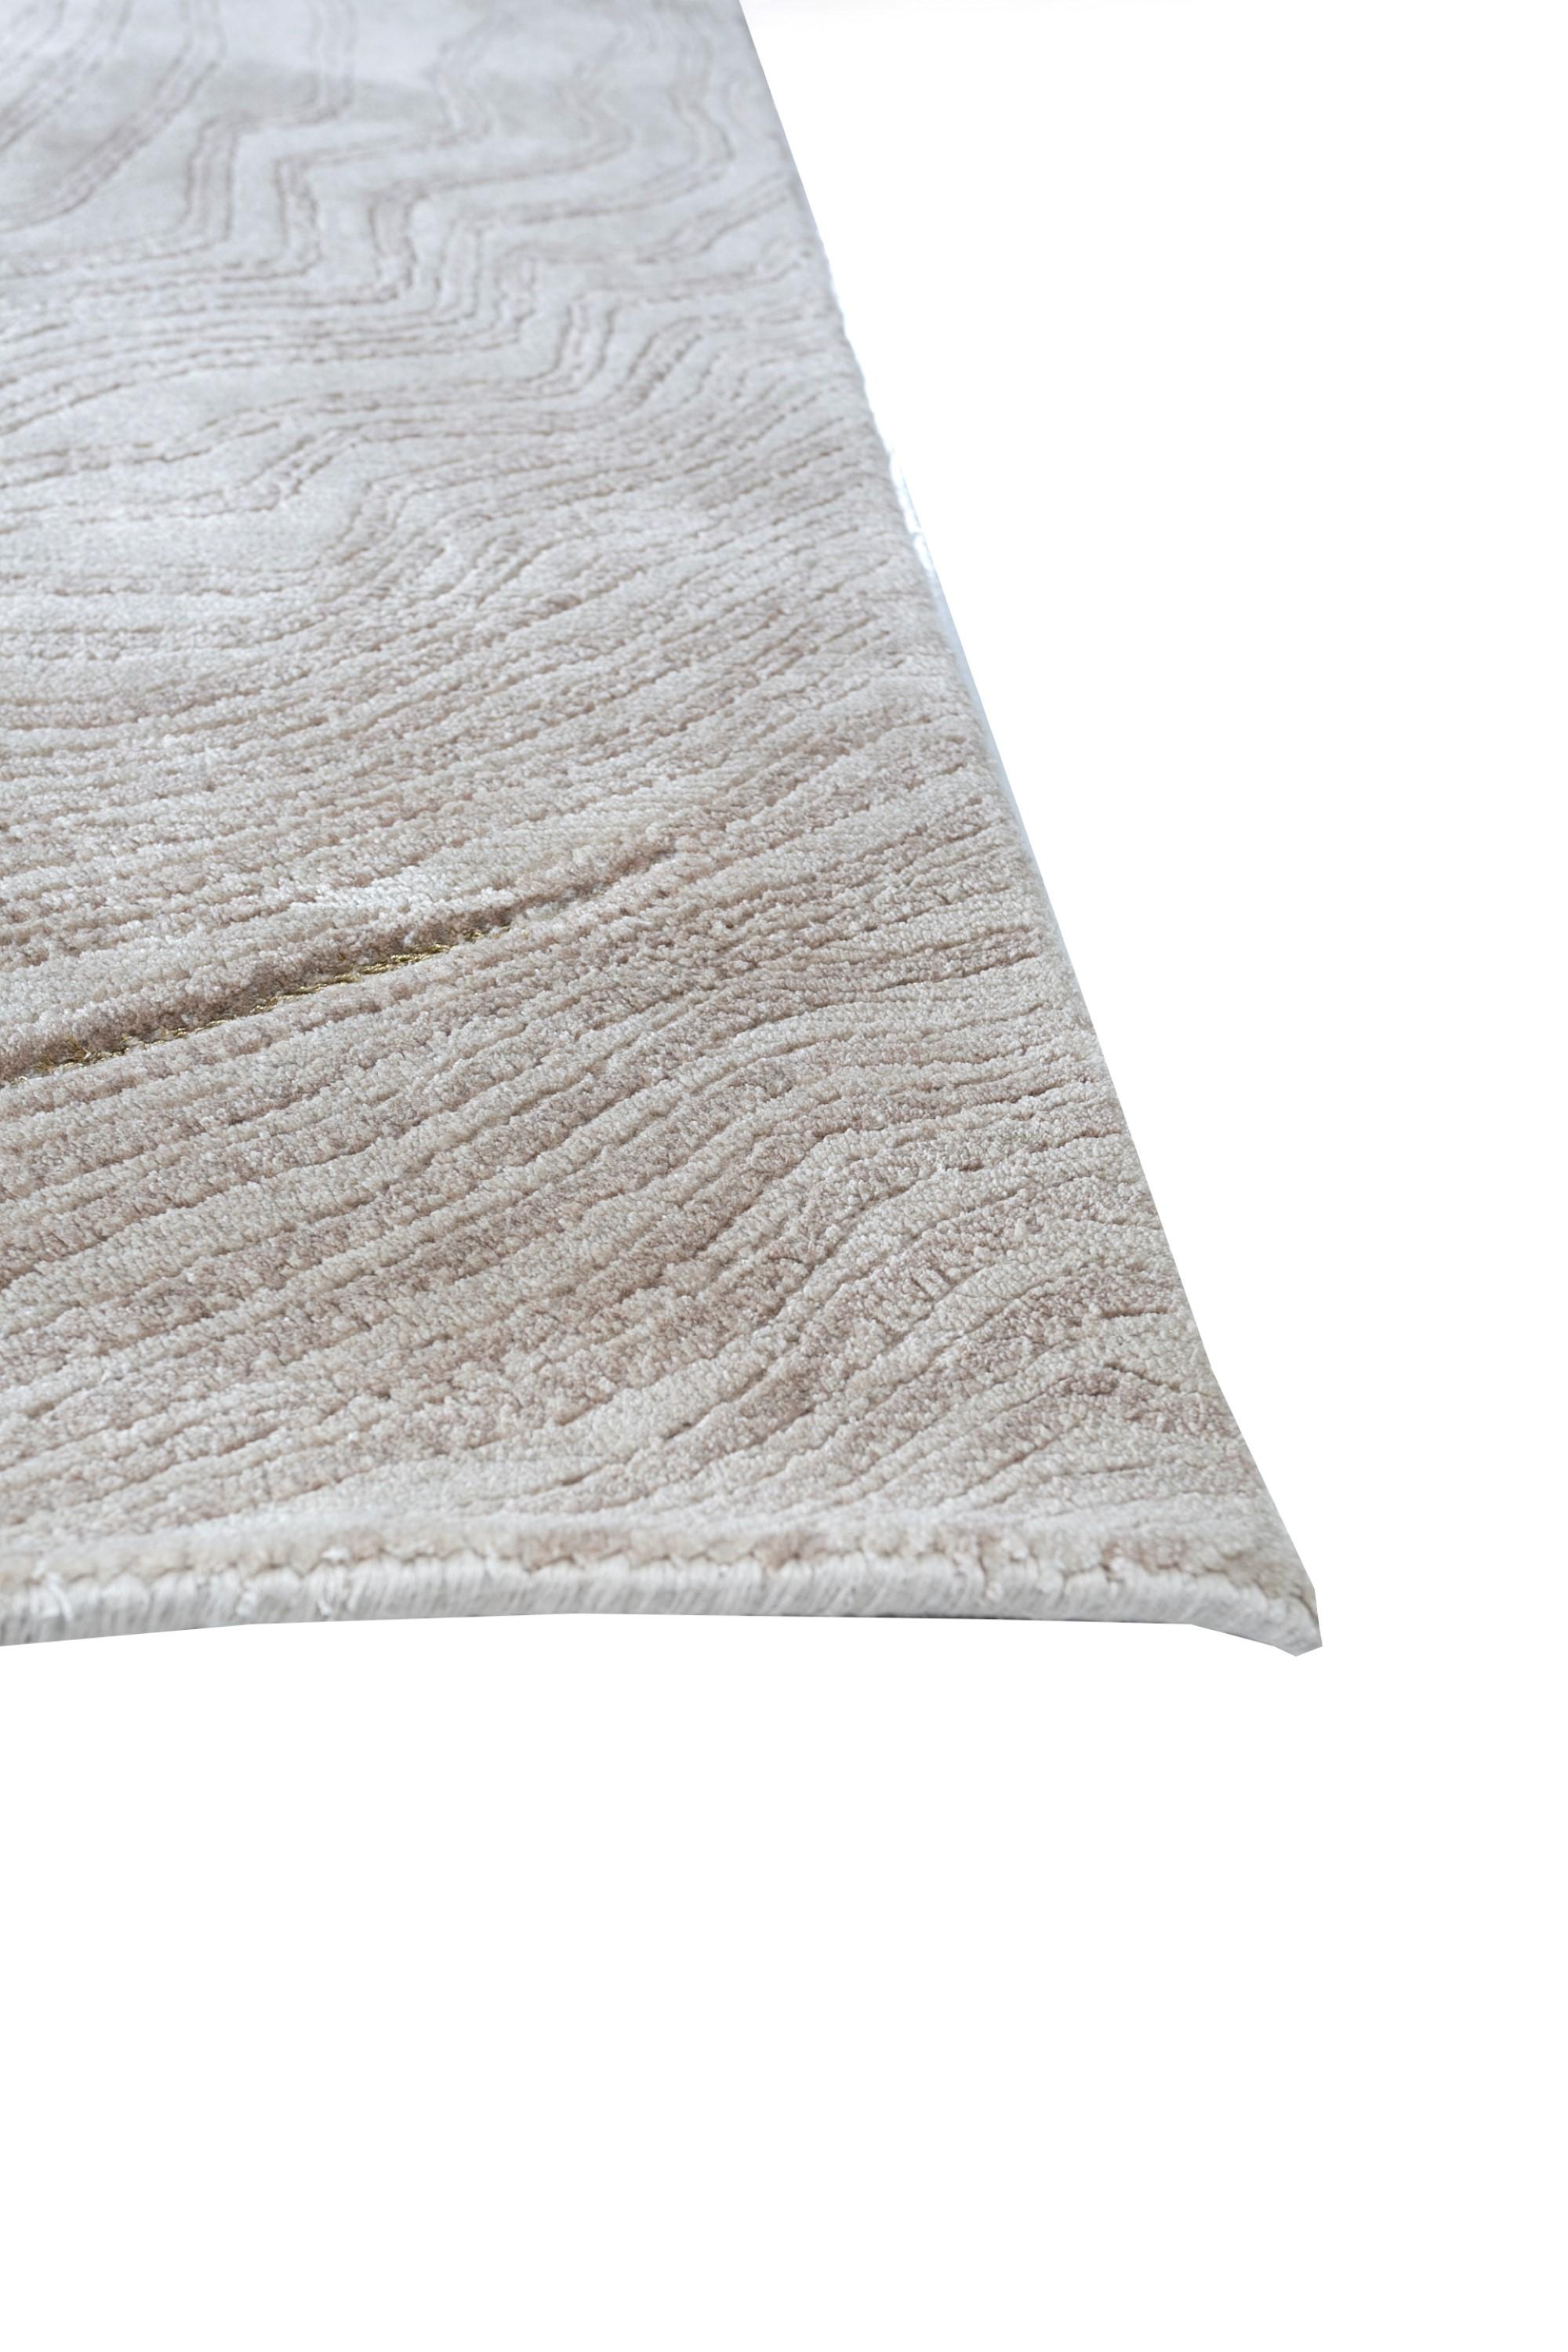 Modern Dune Drift Marble & White Sand 300x420 cm Hand Knotted Rug For Sale